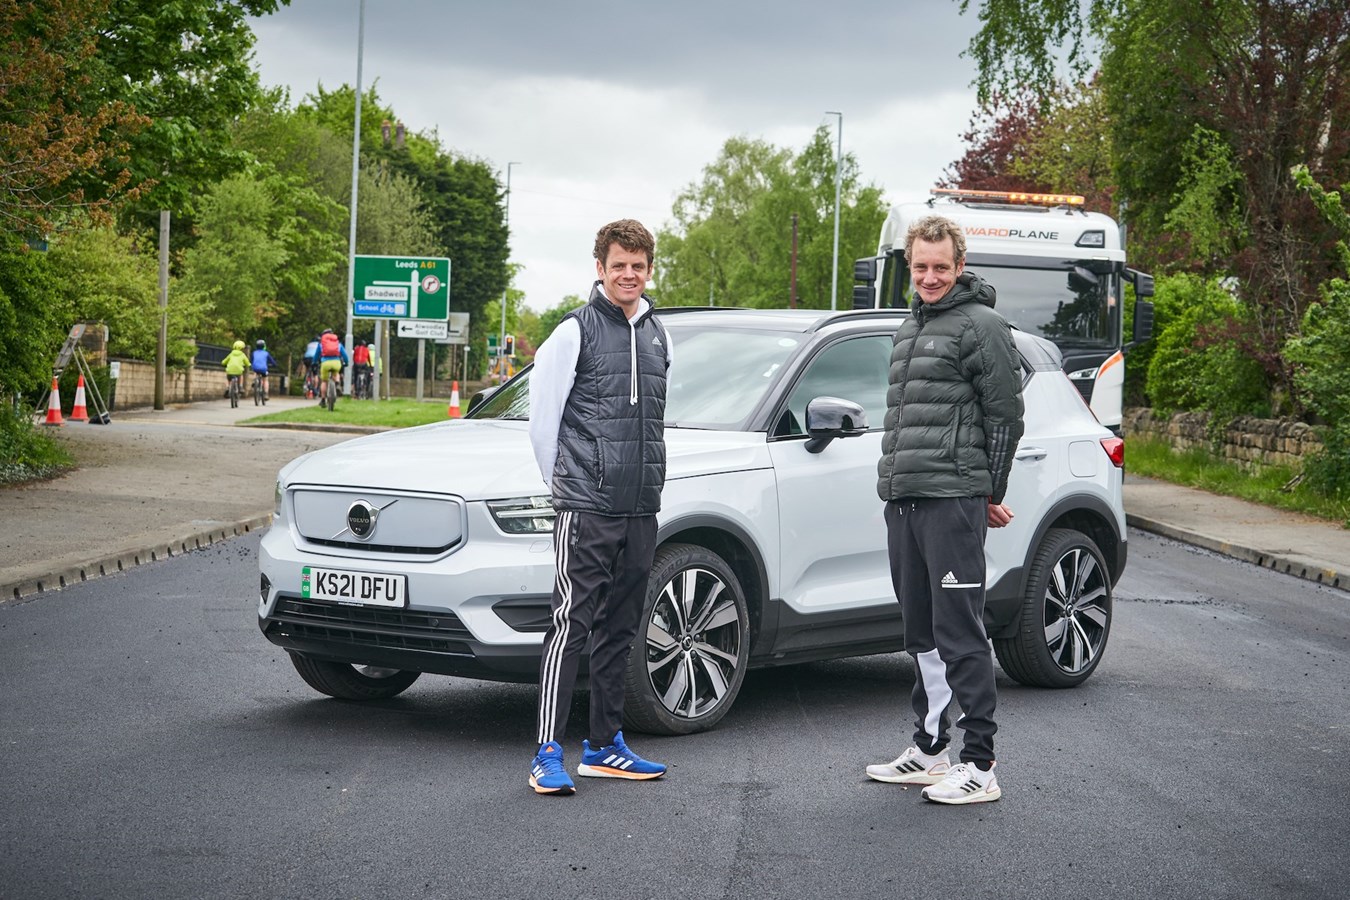 Volvo Car UK and the Brownlee brothers unveil the ‘Recycled Road’